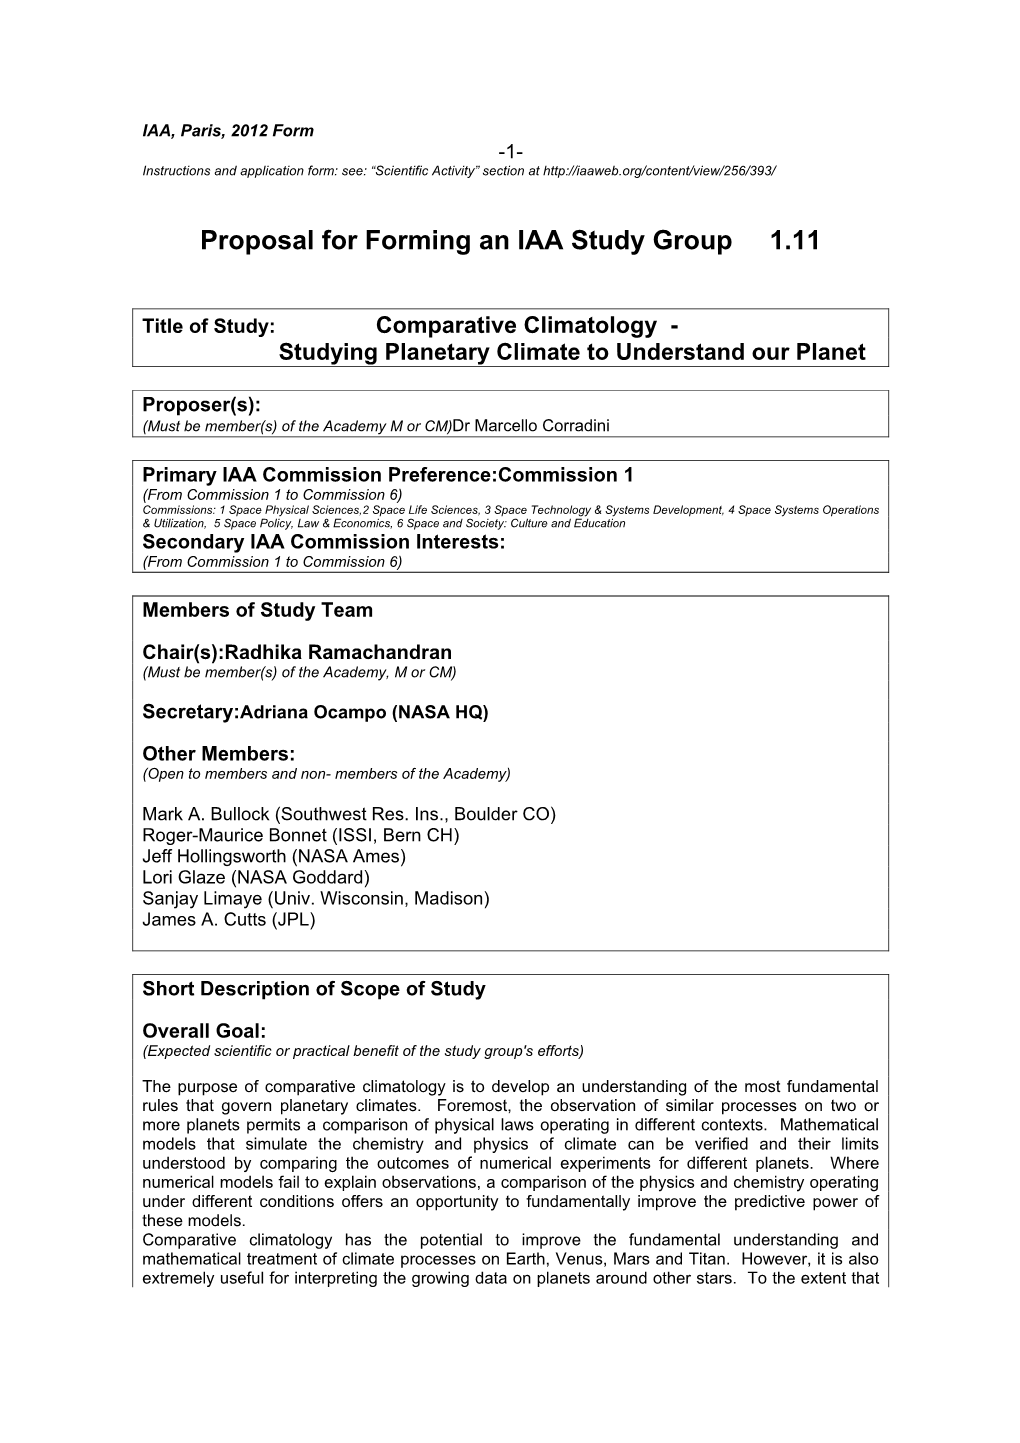 Proposal for Forming an IAA Study Group 1.11